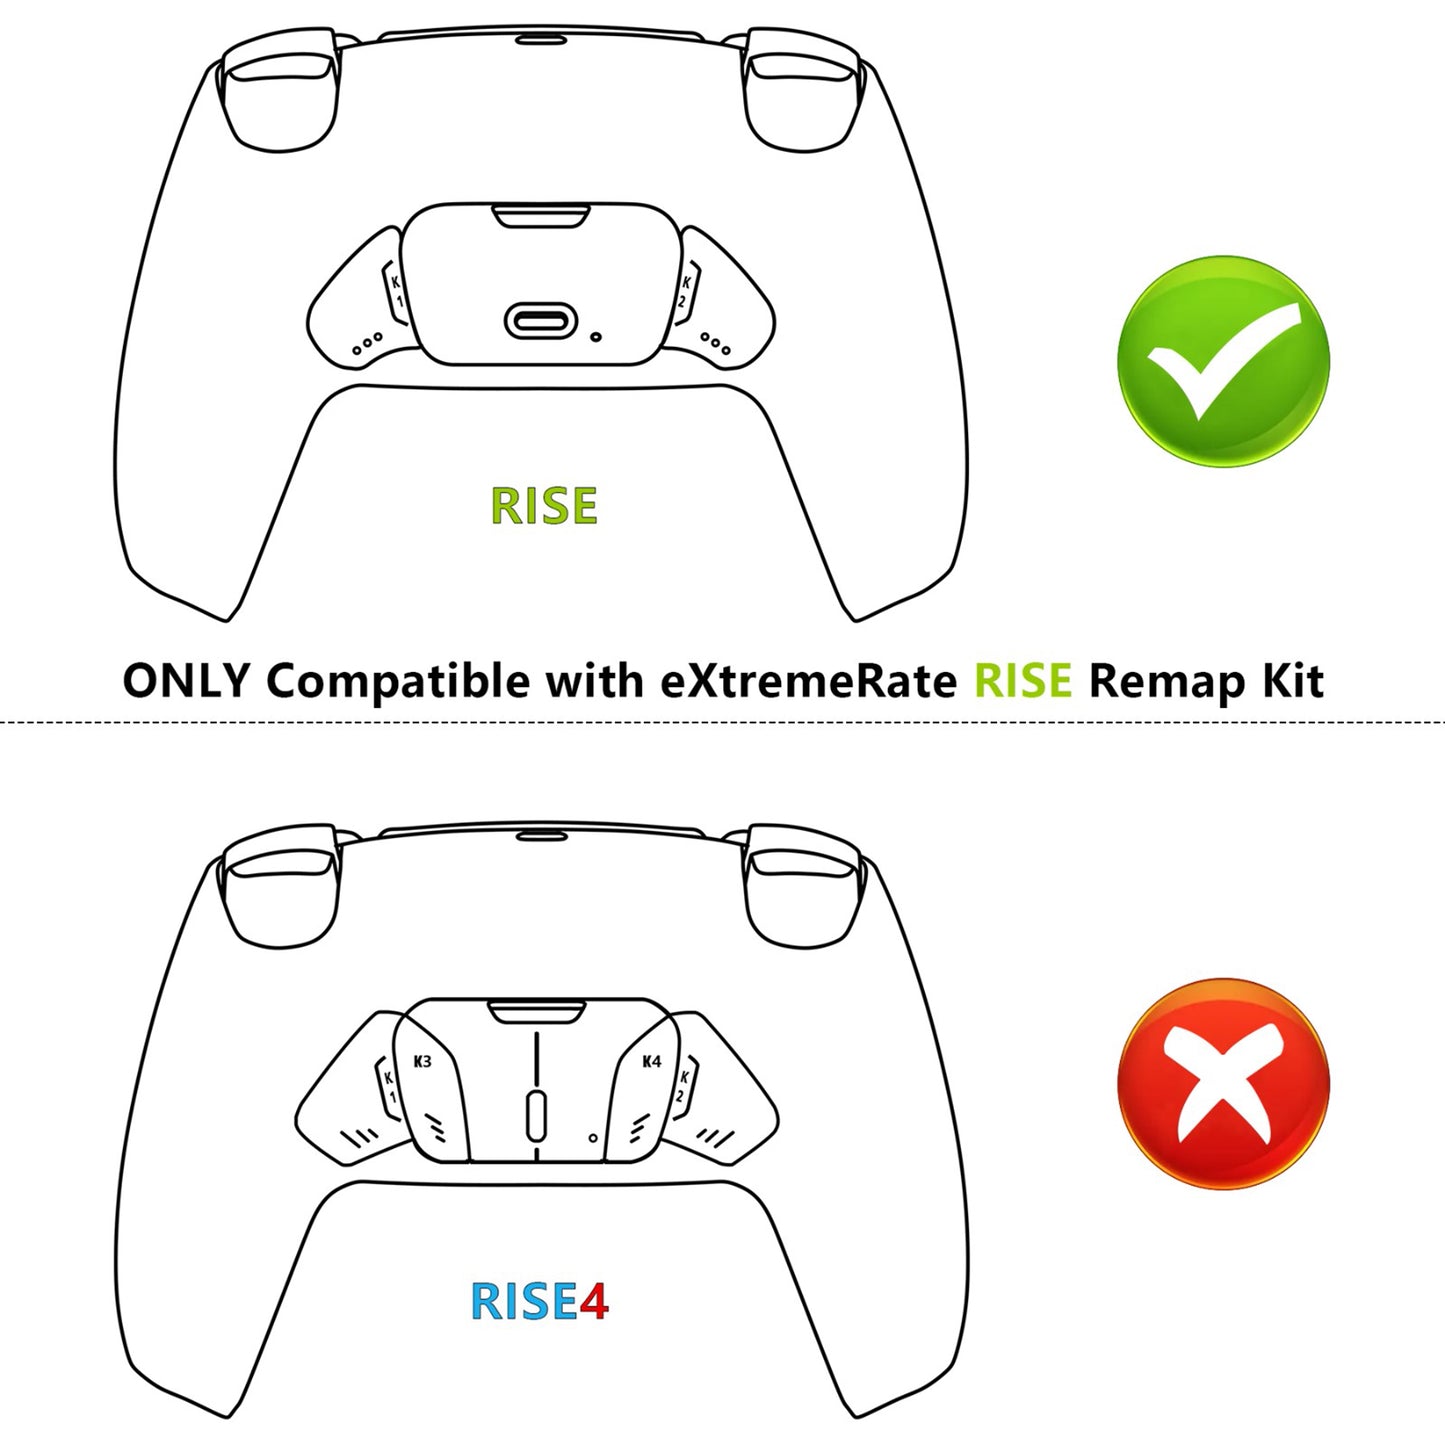 eXtremeRate Replacement Redesigned K1 K2 Back Buttons for eXtremerate RISE Remap Kit, Compatible with PS5 Controller - Chrome Gold eXtremeRate